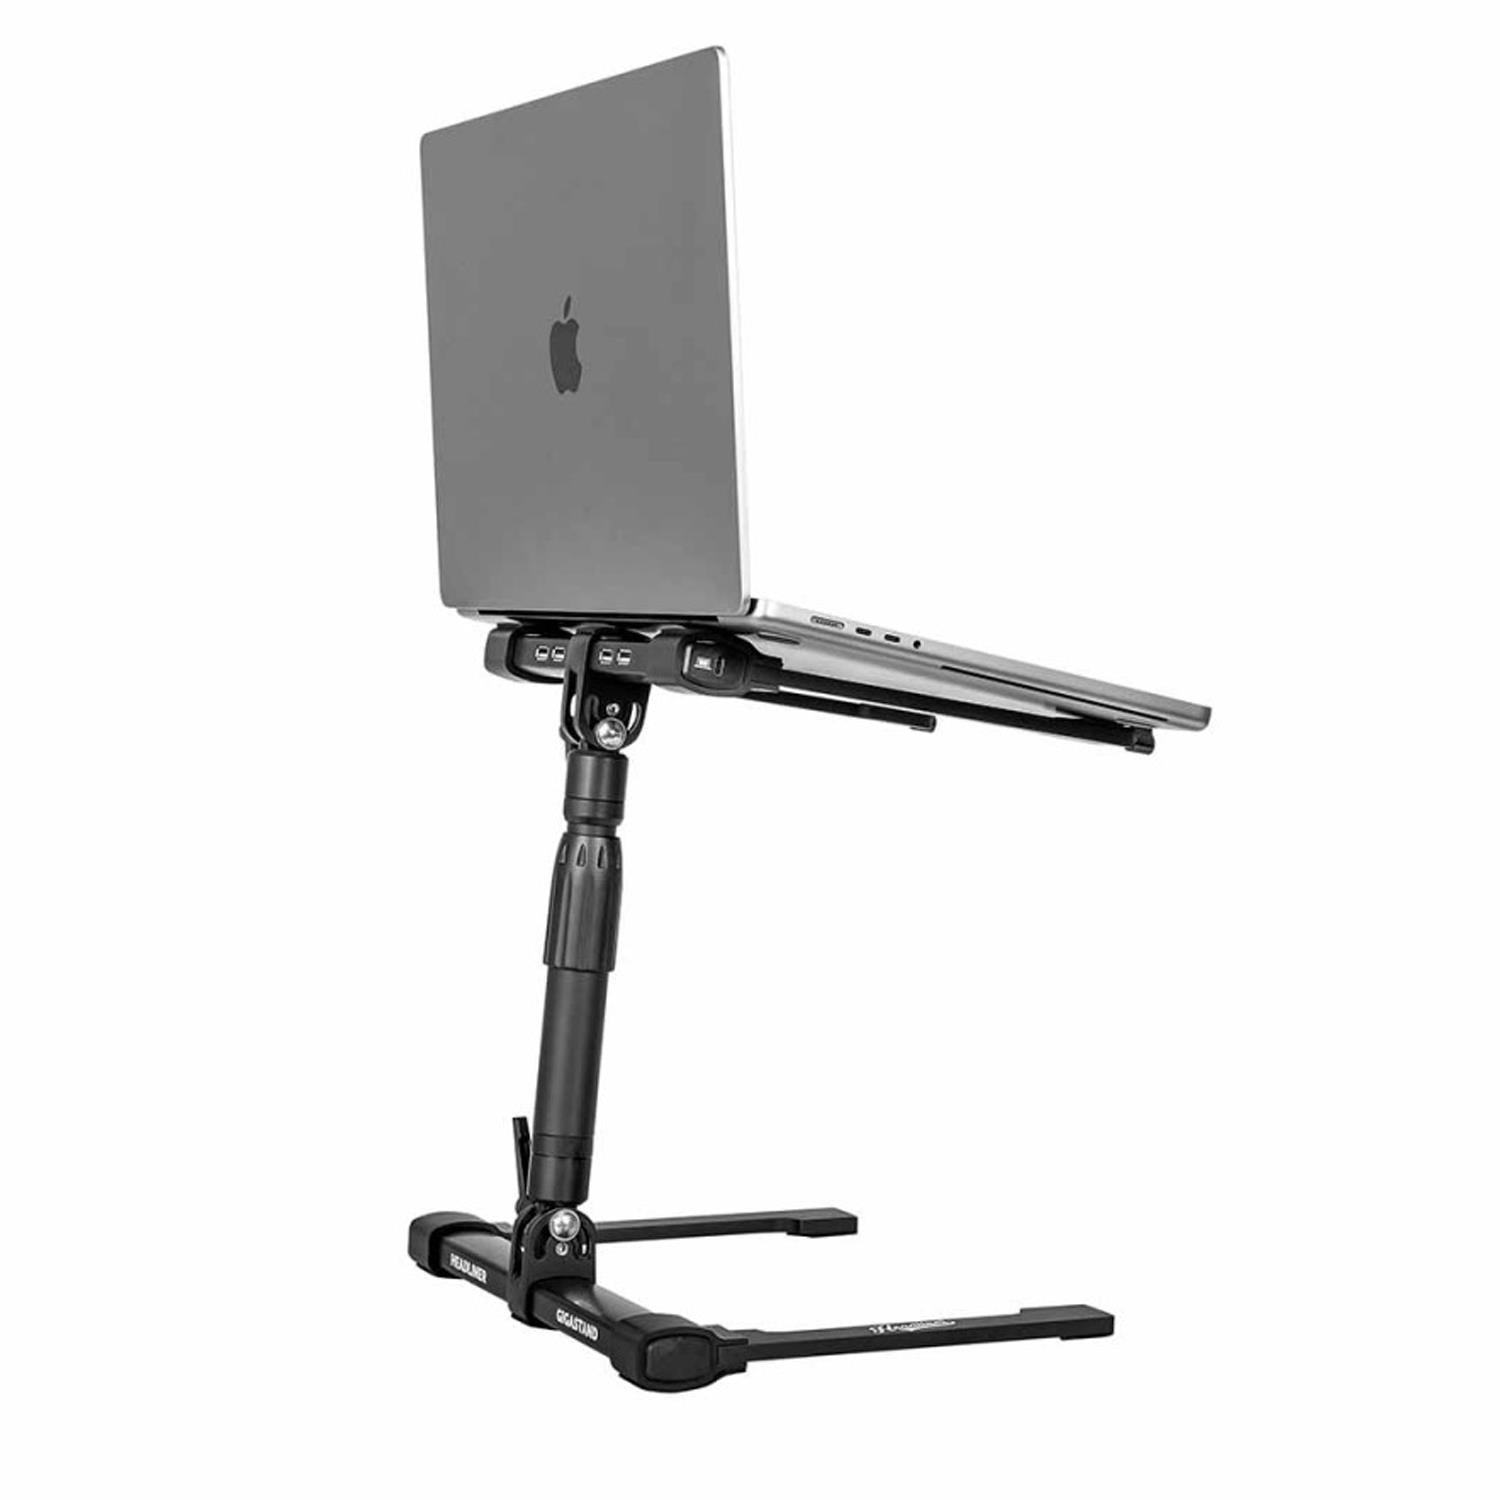 Headliner Gigastand USB Laptop Stand - DY Pro Audio